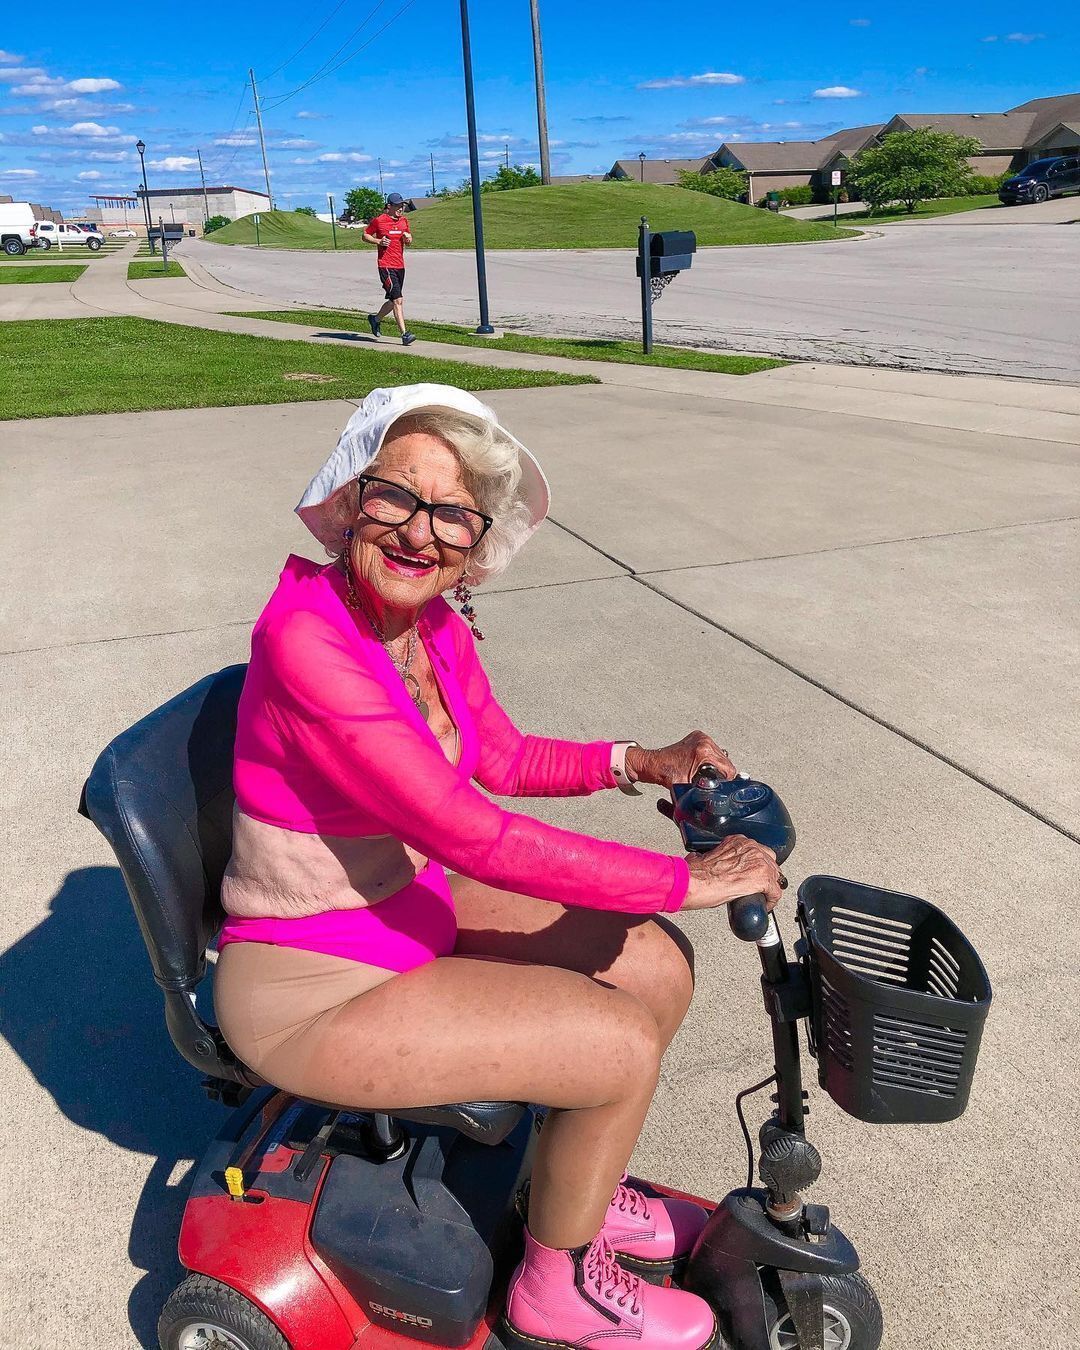 Age is just a number: a 95-year-old pensioner blew up Instagram with daring images and caused controversy. Photo